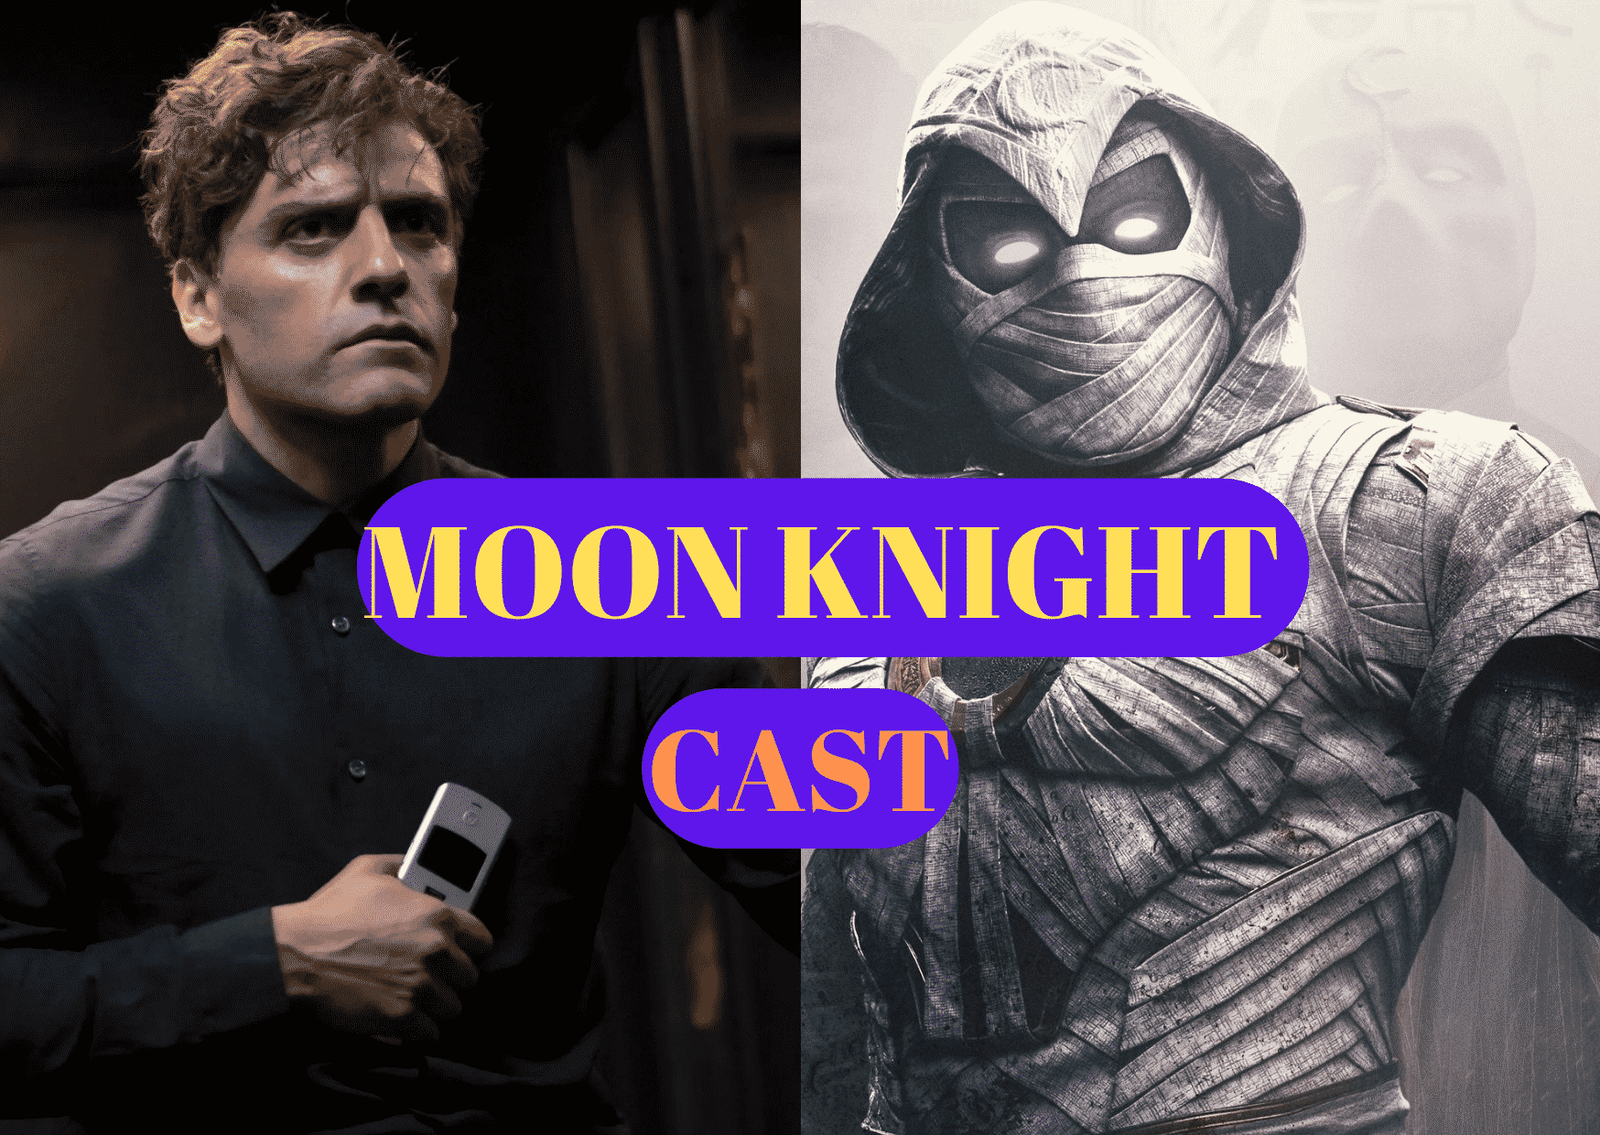 Moon Knight Cast 2022 - Ages, Partners, Characters